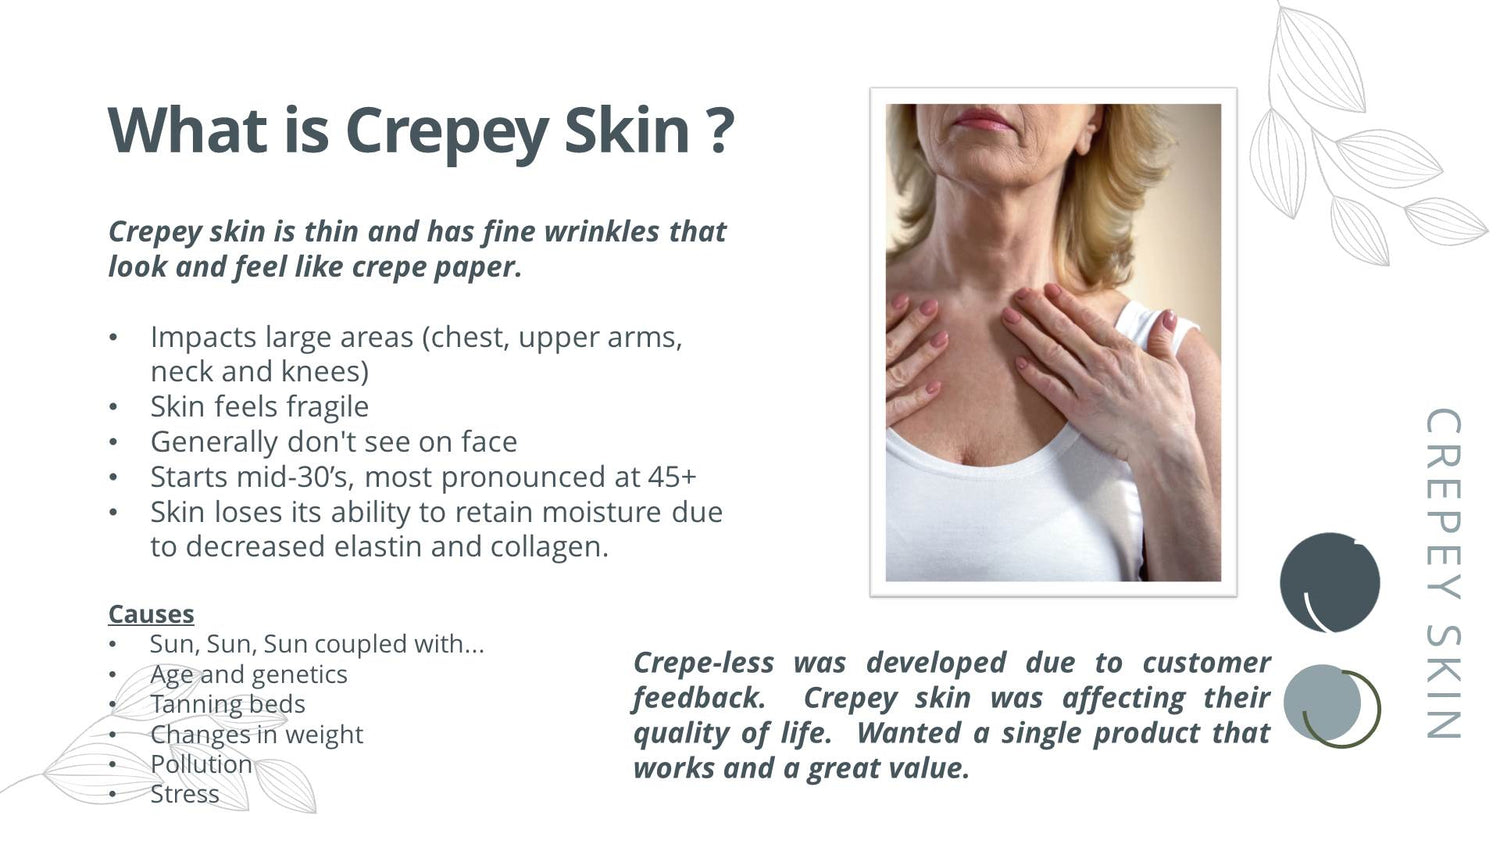 Crepey skin firming cream to repair crepey arms, neck, legs, chest